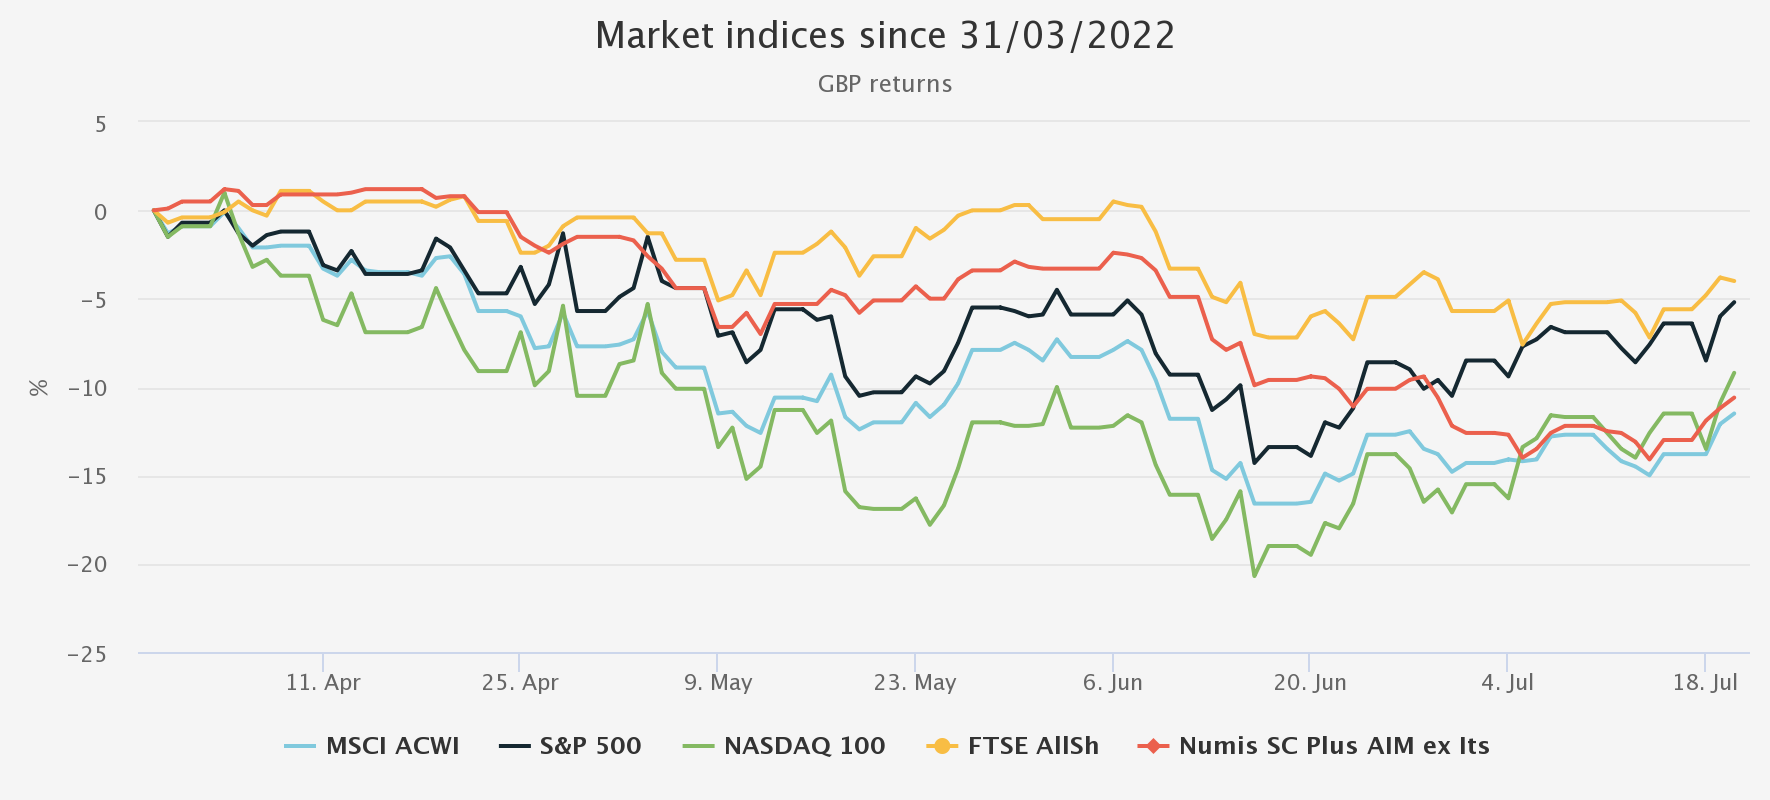 Market indices since March 2022